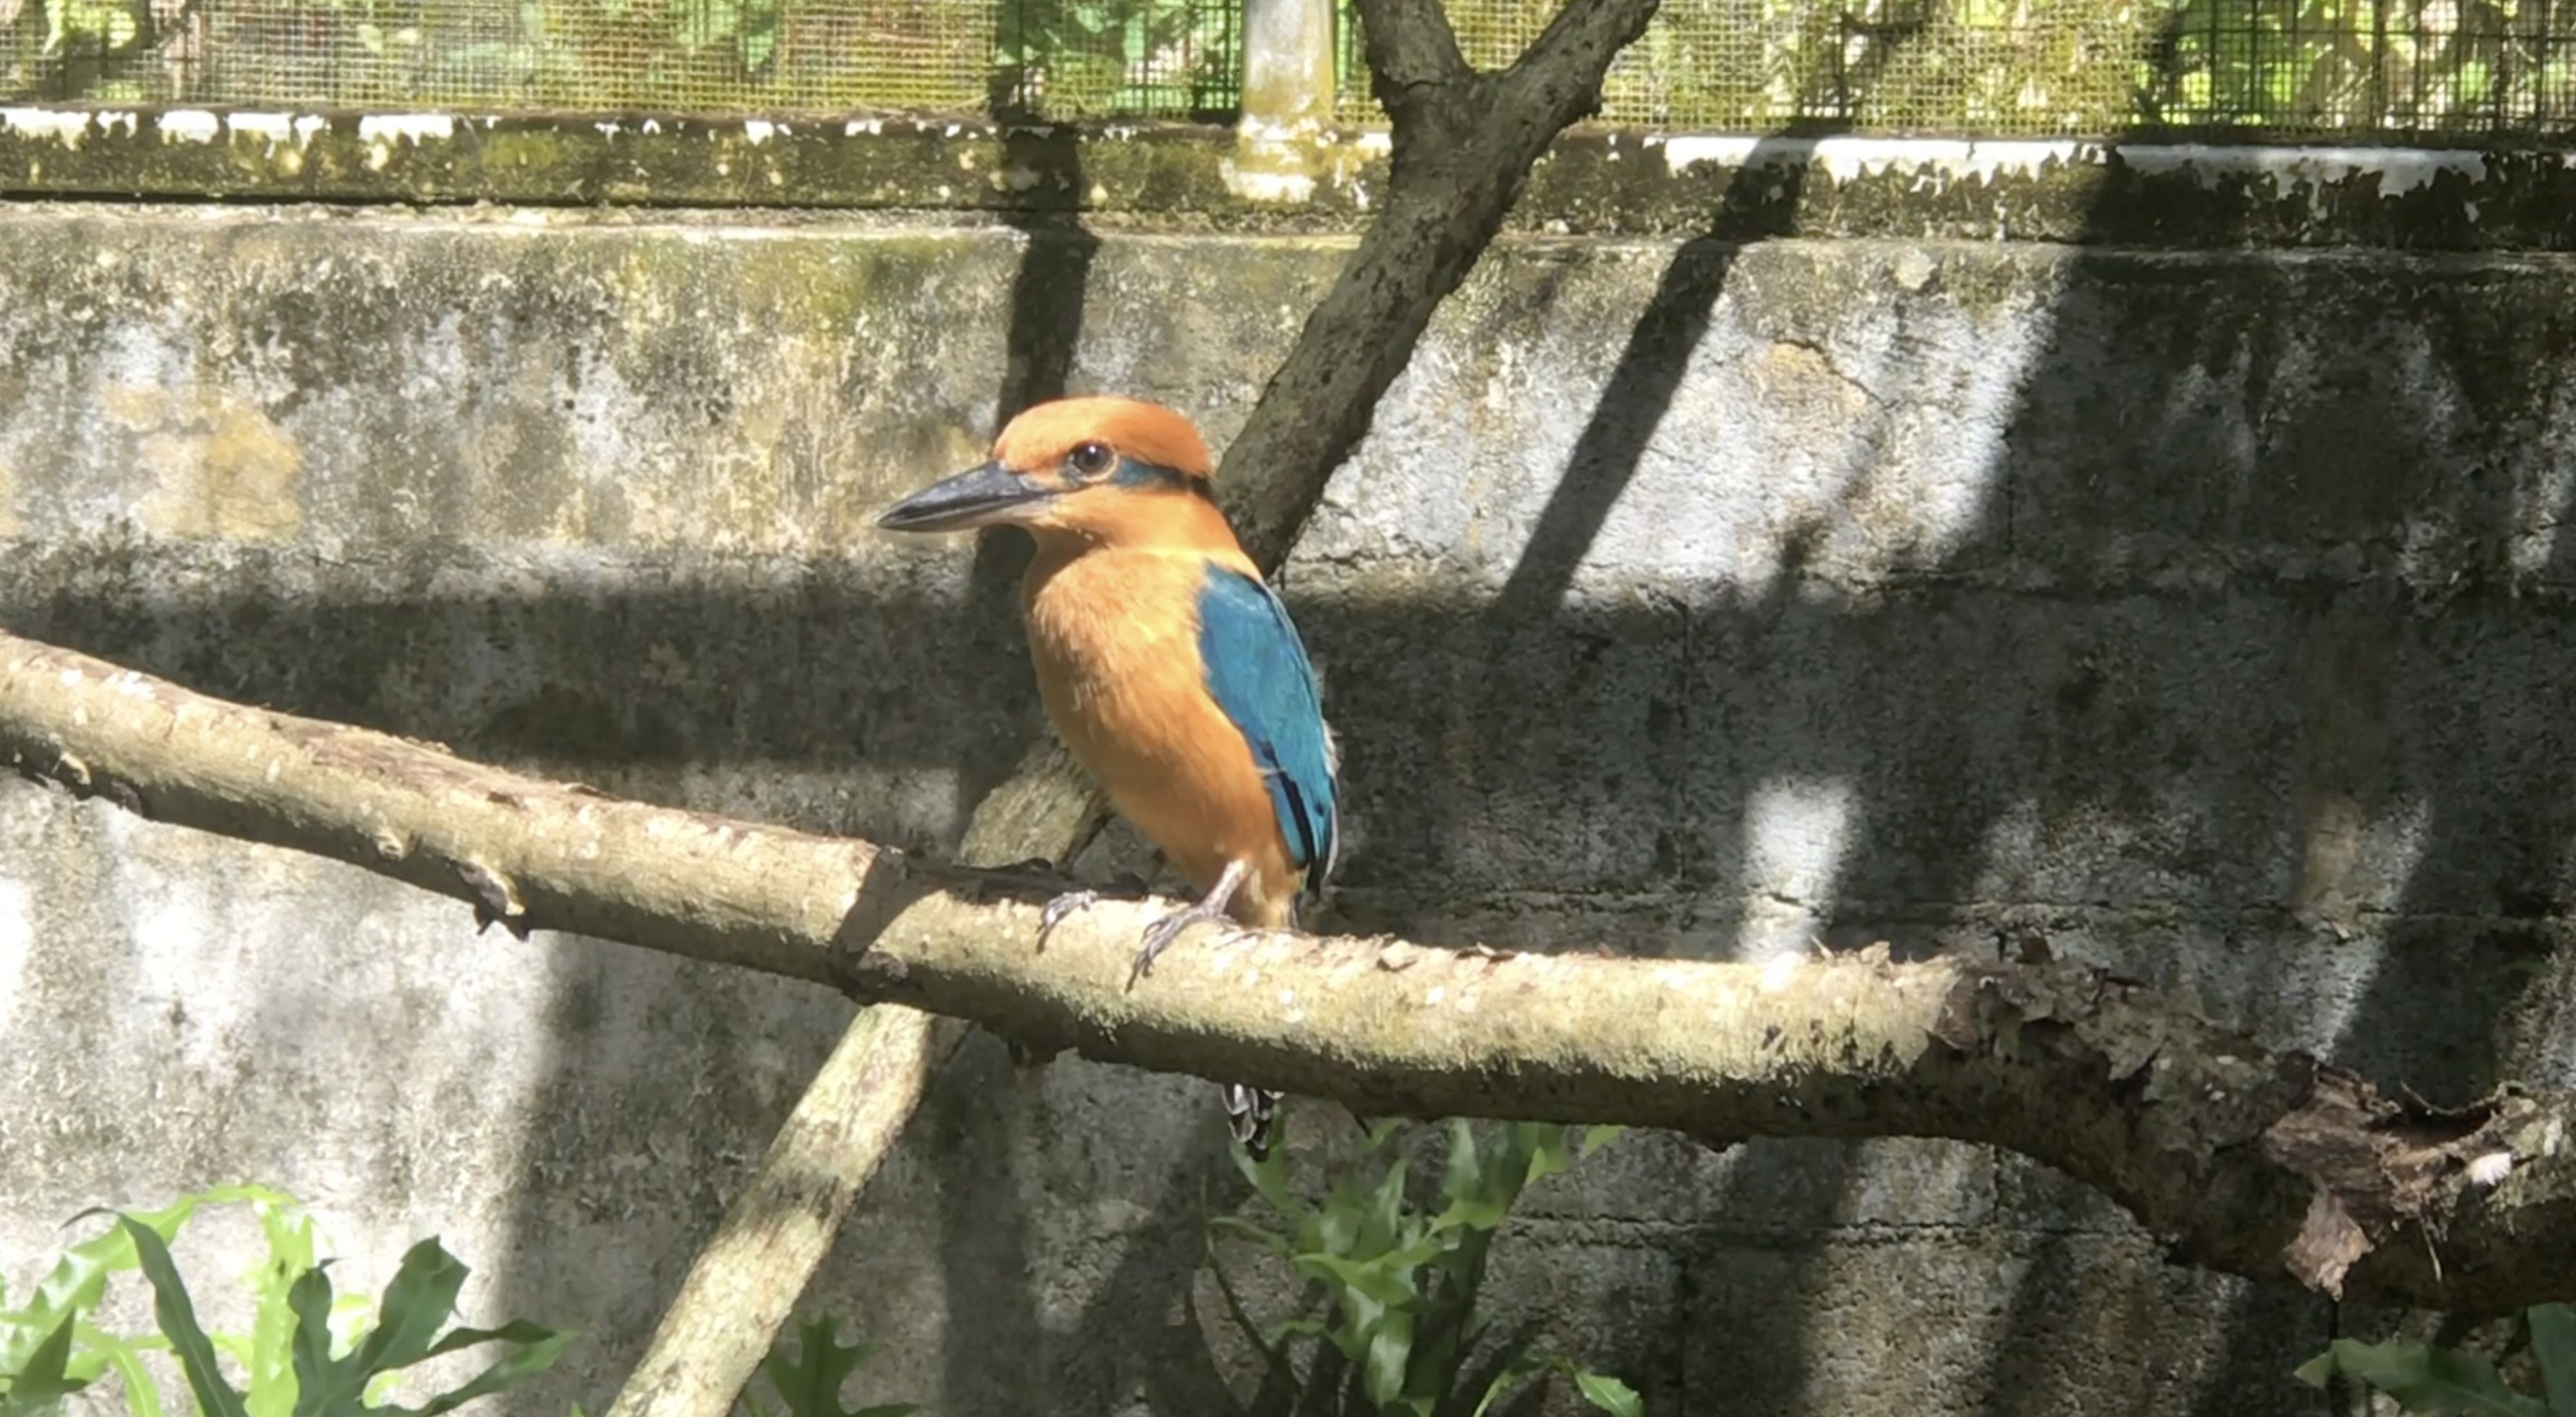 A male Guam kingfisher sits on a branch in a netted enclosure.